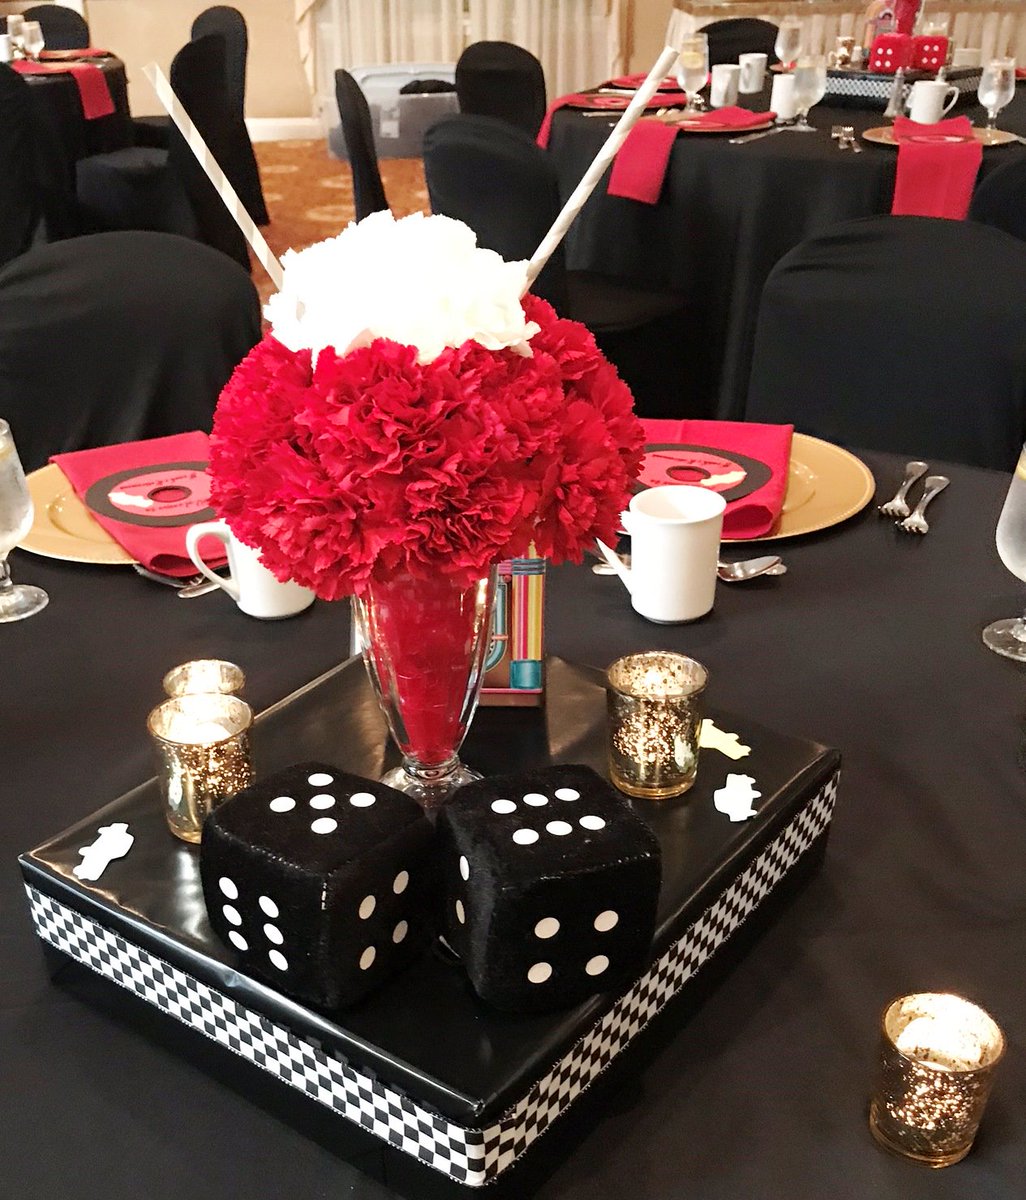 Exploring different themes for your next event?  How about a Fifties Styled Event complete with a Milk Shake Bar, Blue Plate Special Buffet, Cup Cakes, Donuts and Apple Pie. 
#LIEvents  #LIVenue #FiftiesThemedEvent #RetirementParty